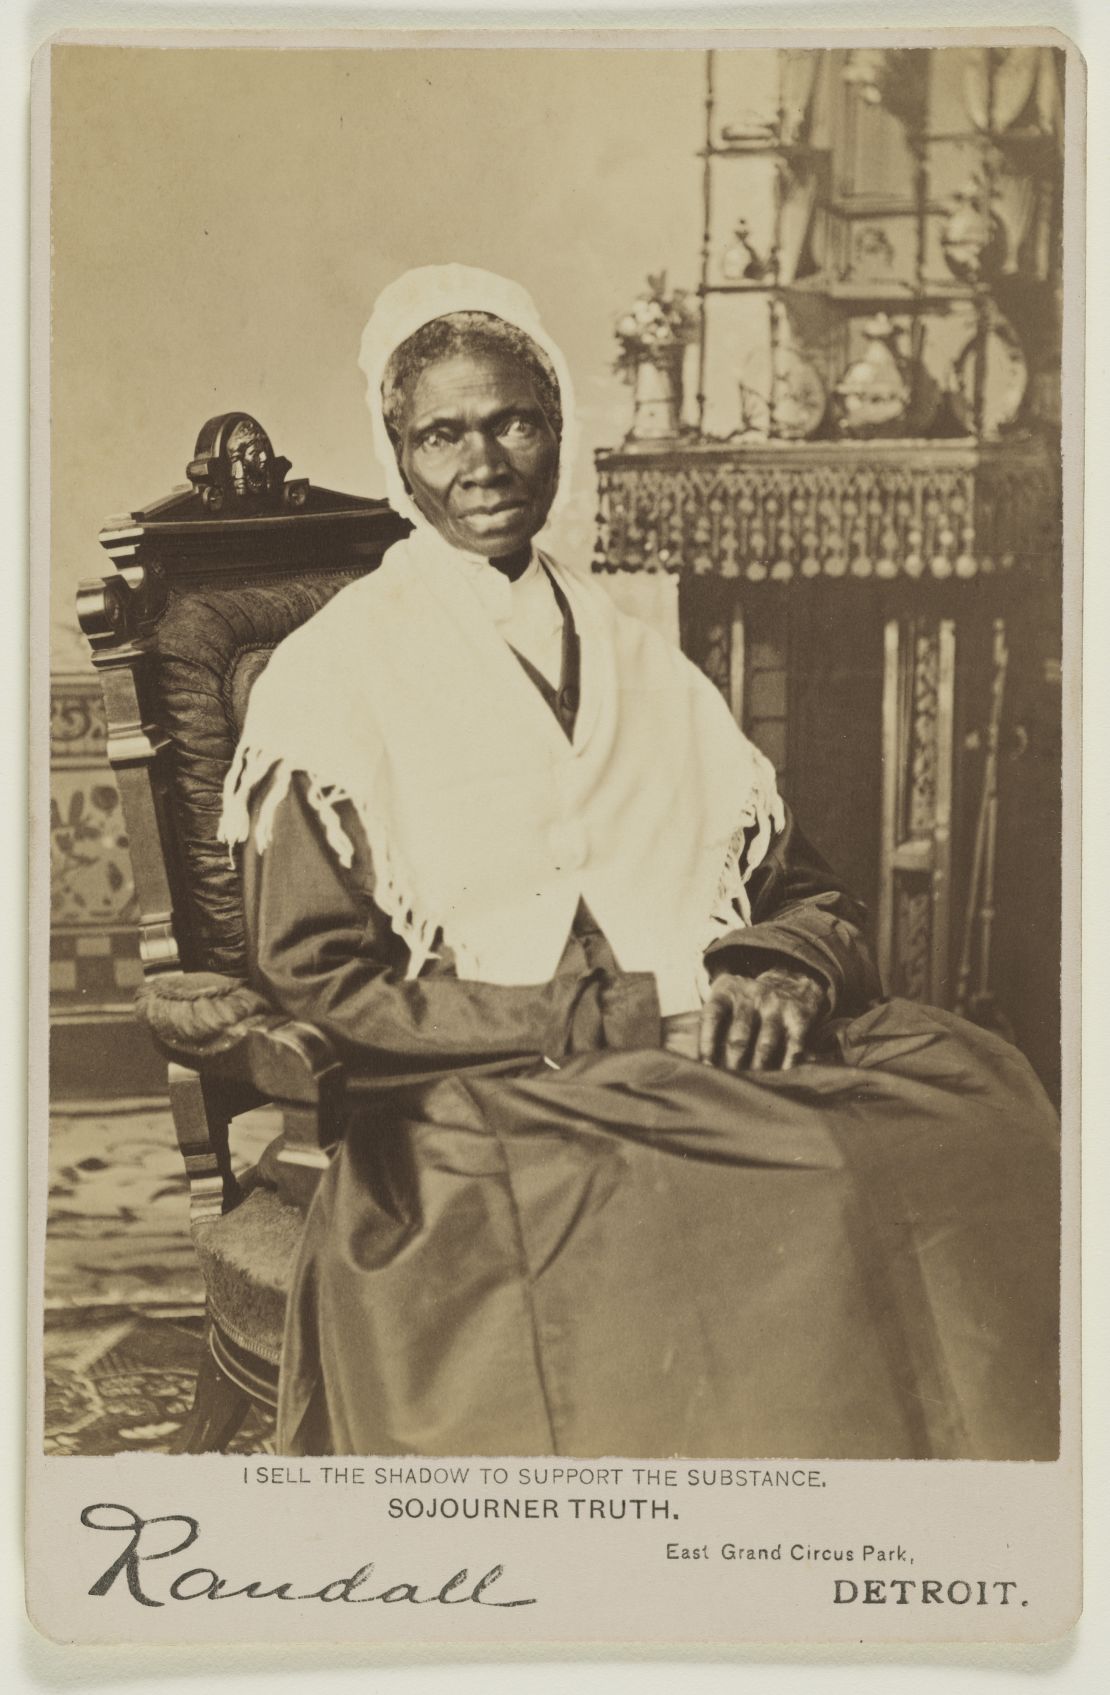 A portrait of Sojourner Truth c. 1870. Born into slavery around 1797, she was both an abolishionist and campaigner for women's rights. 